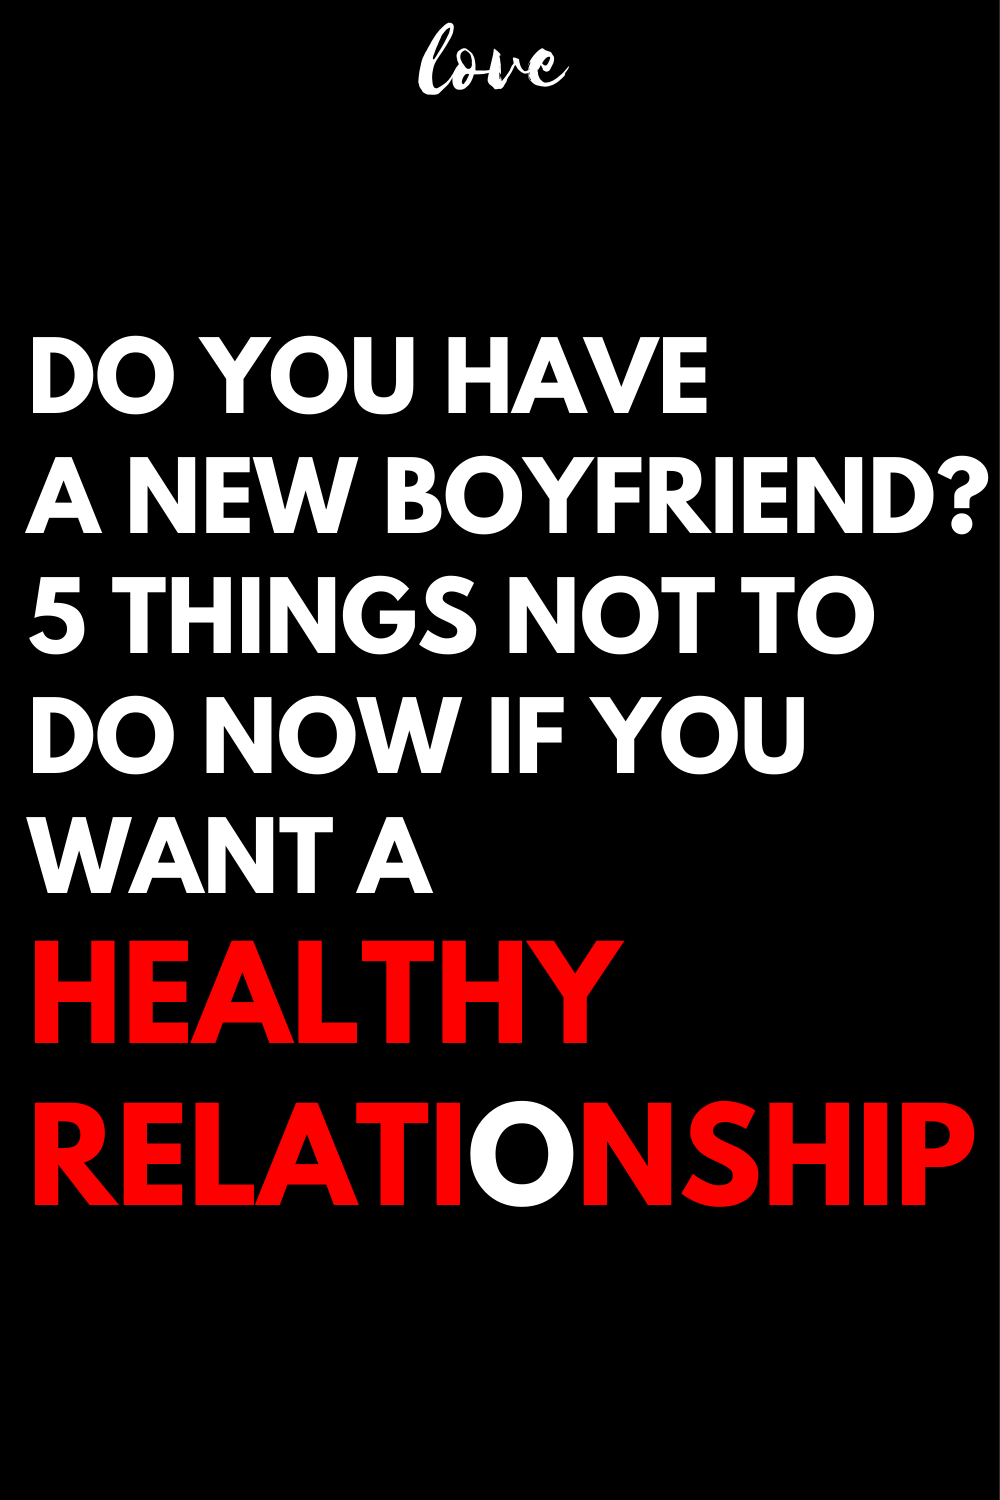 Do you have a new boyfriend? 5 things NOT to do now if you want a healthy relationship